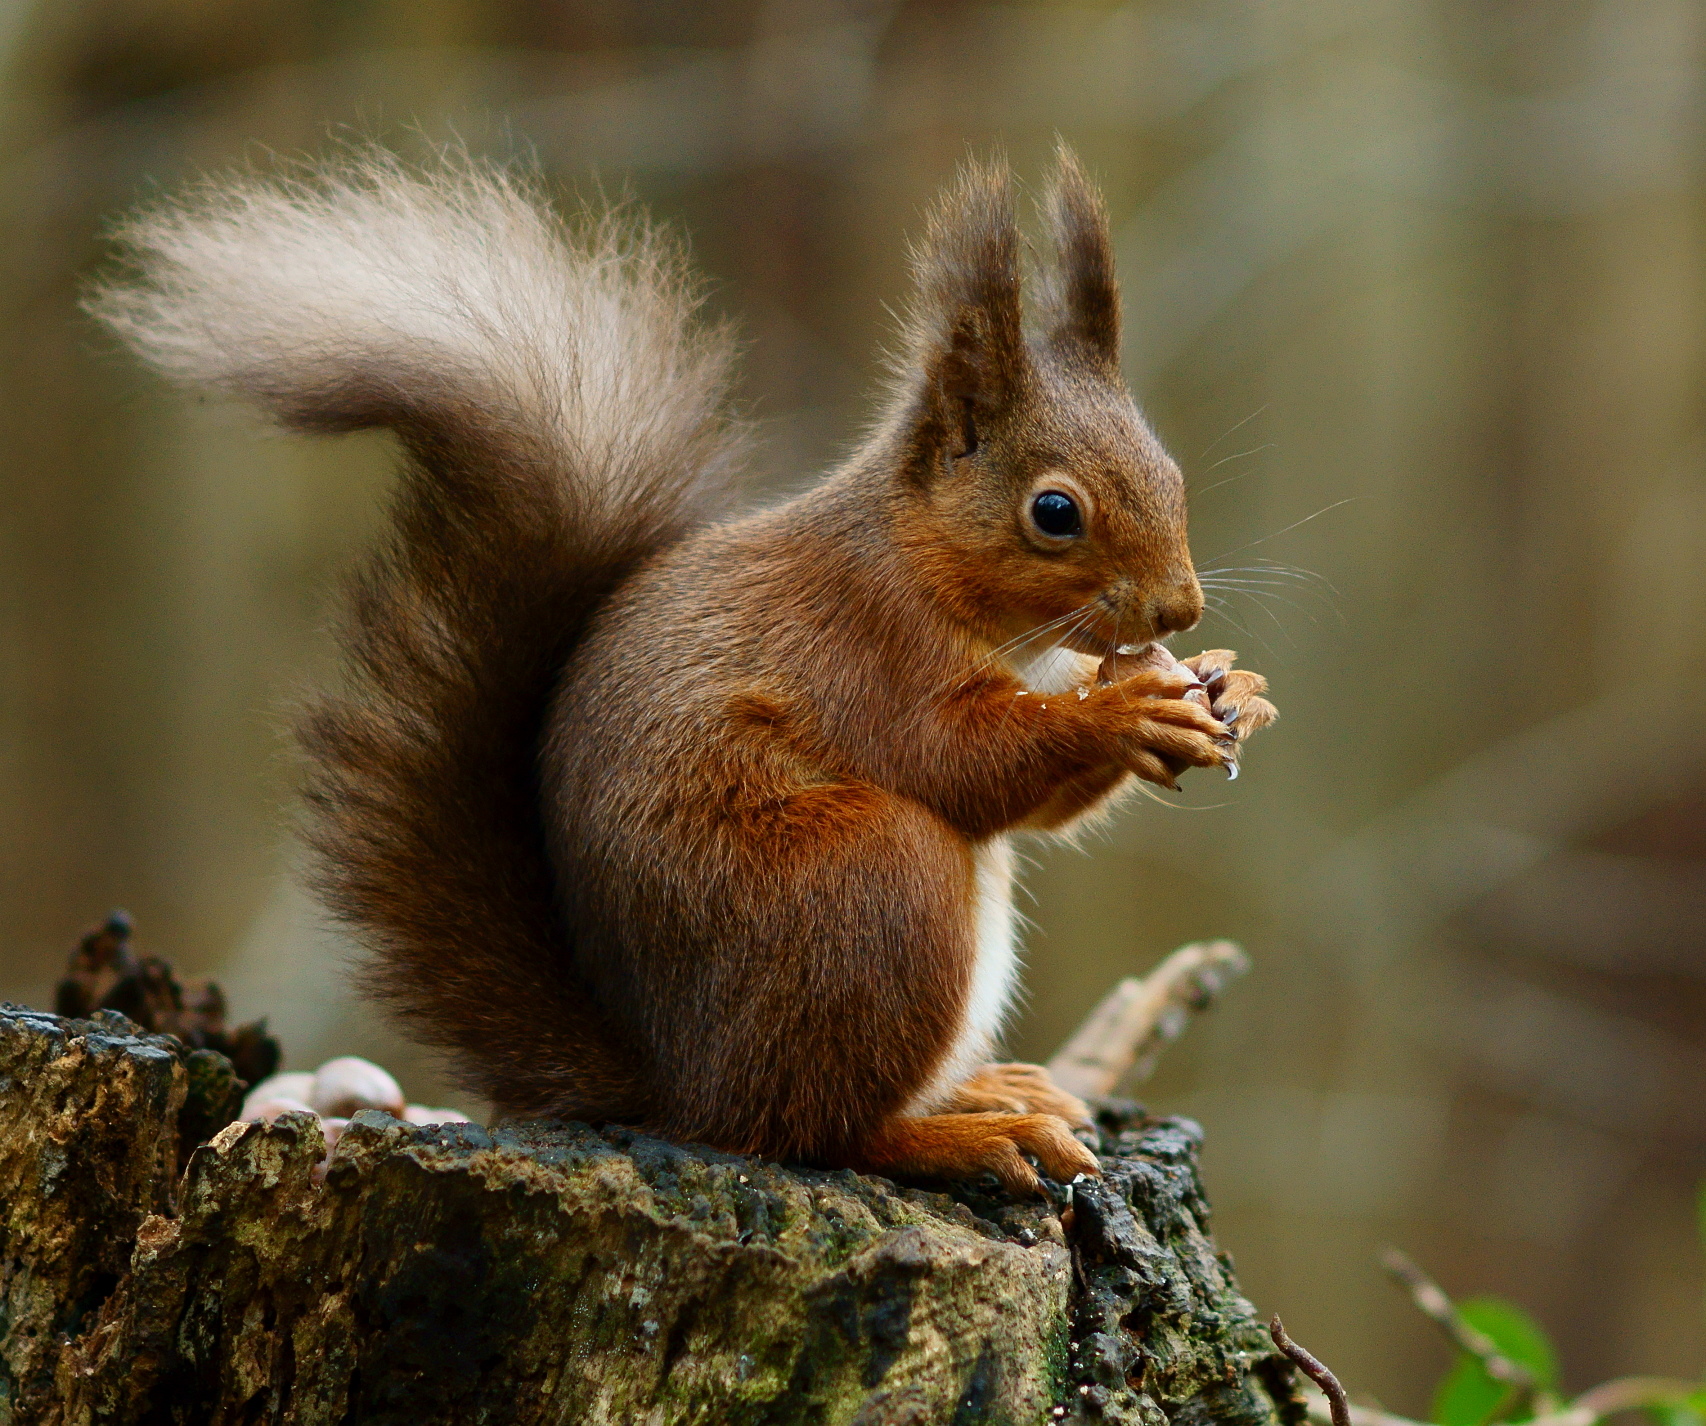 Do red squirrels live in groups?